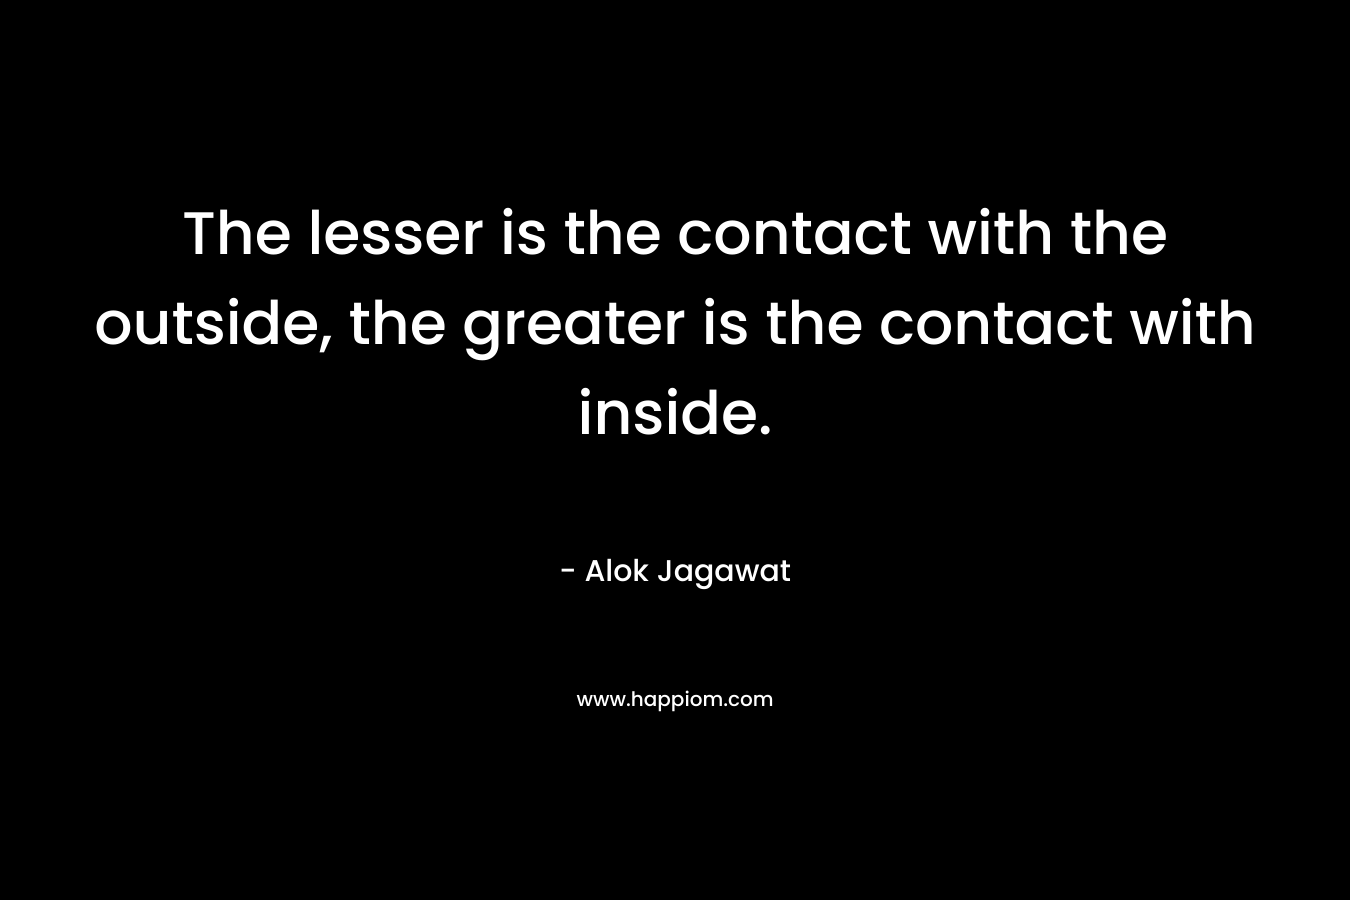 The lesser is the contact with the outside, the greater is the contact with inside.